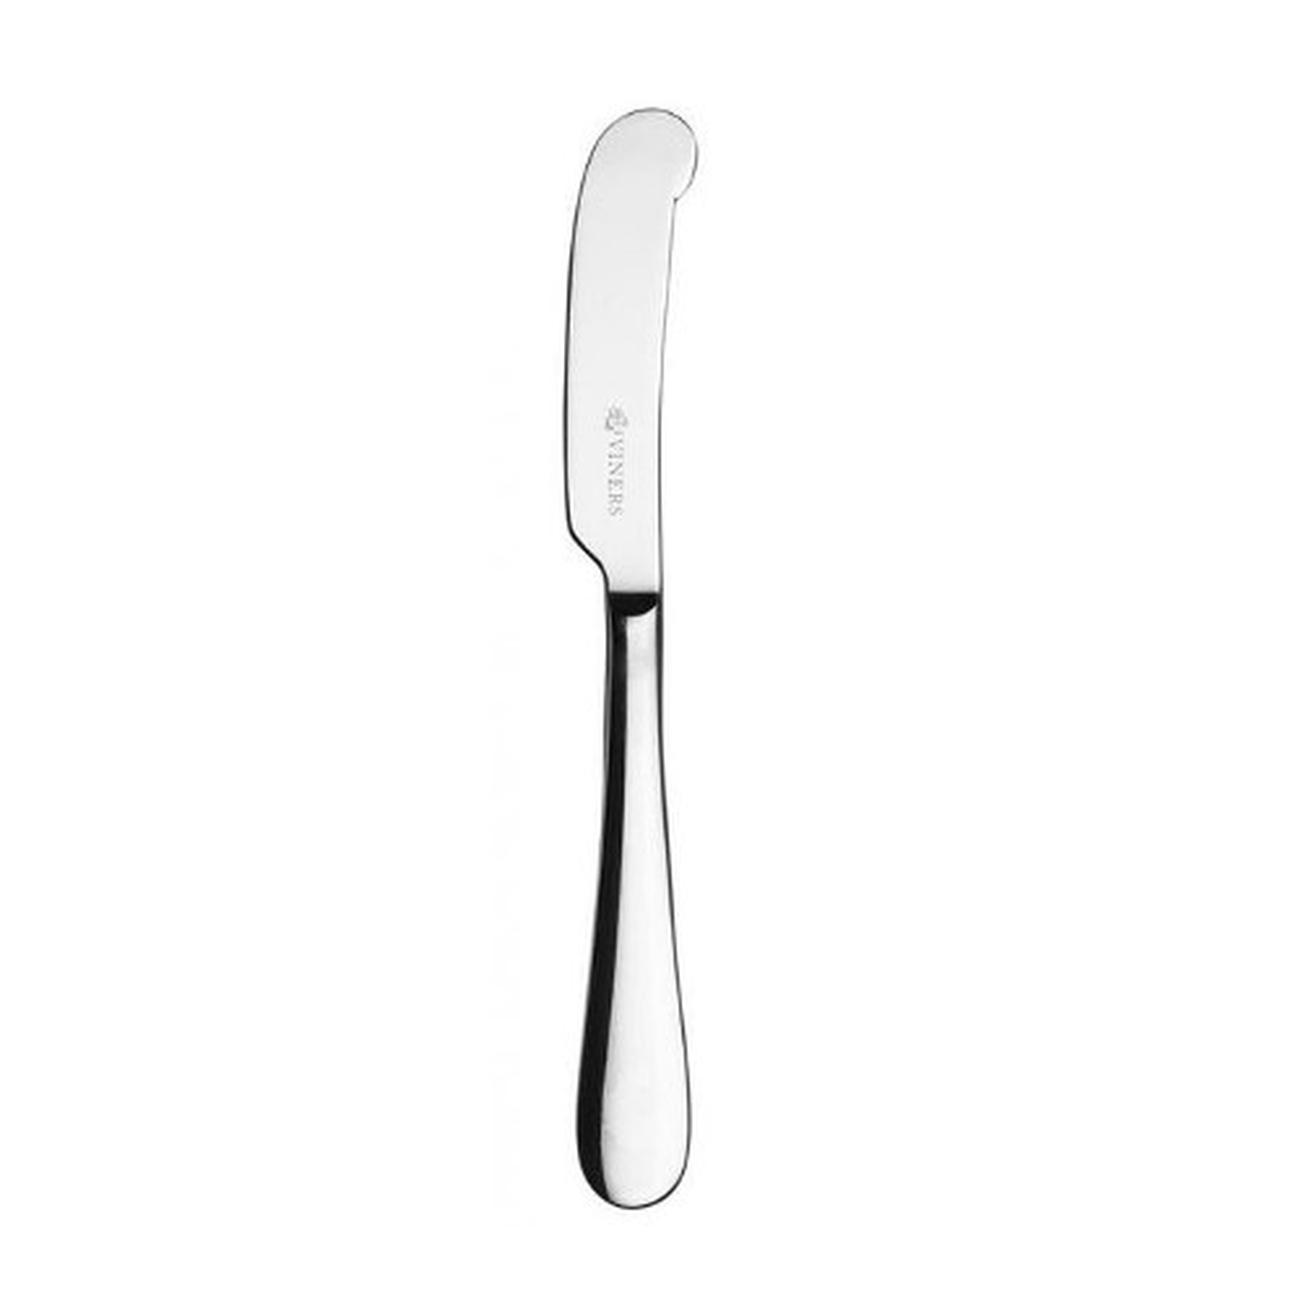 viners-select-stainless-steel-butter-knife - Viners 18.0 Select Butter Knife